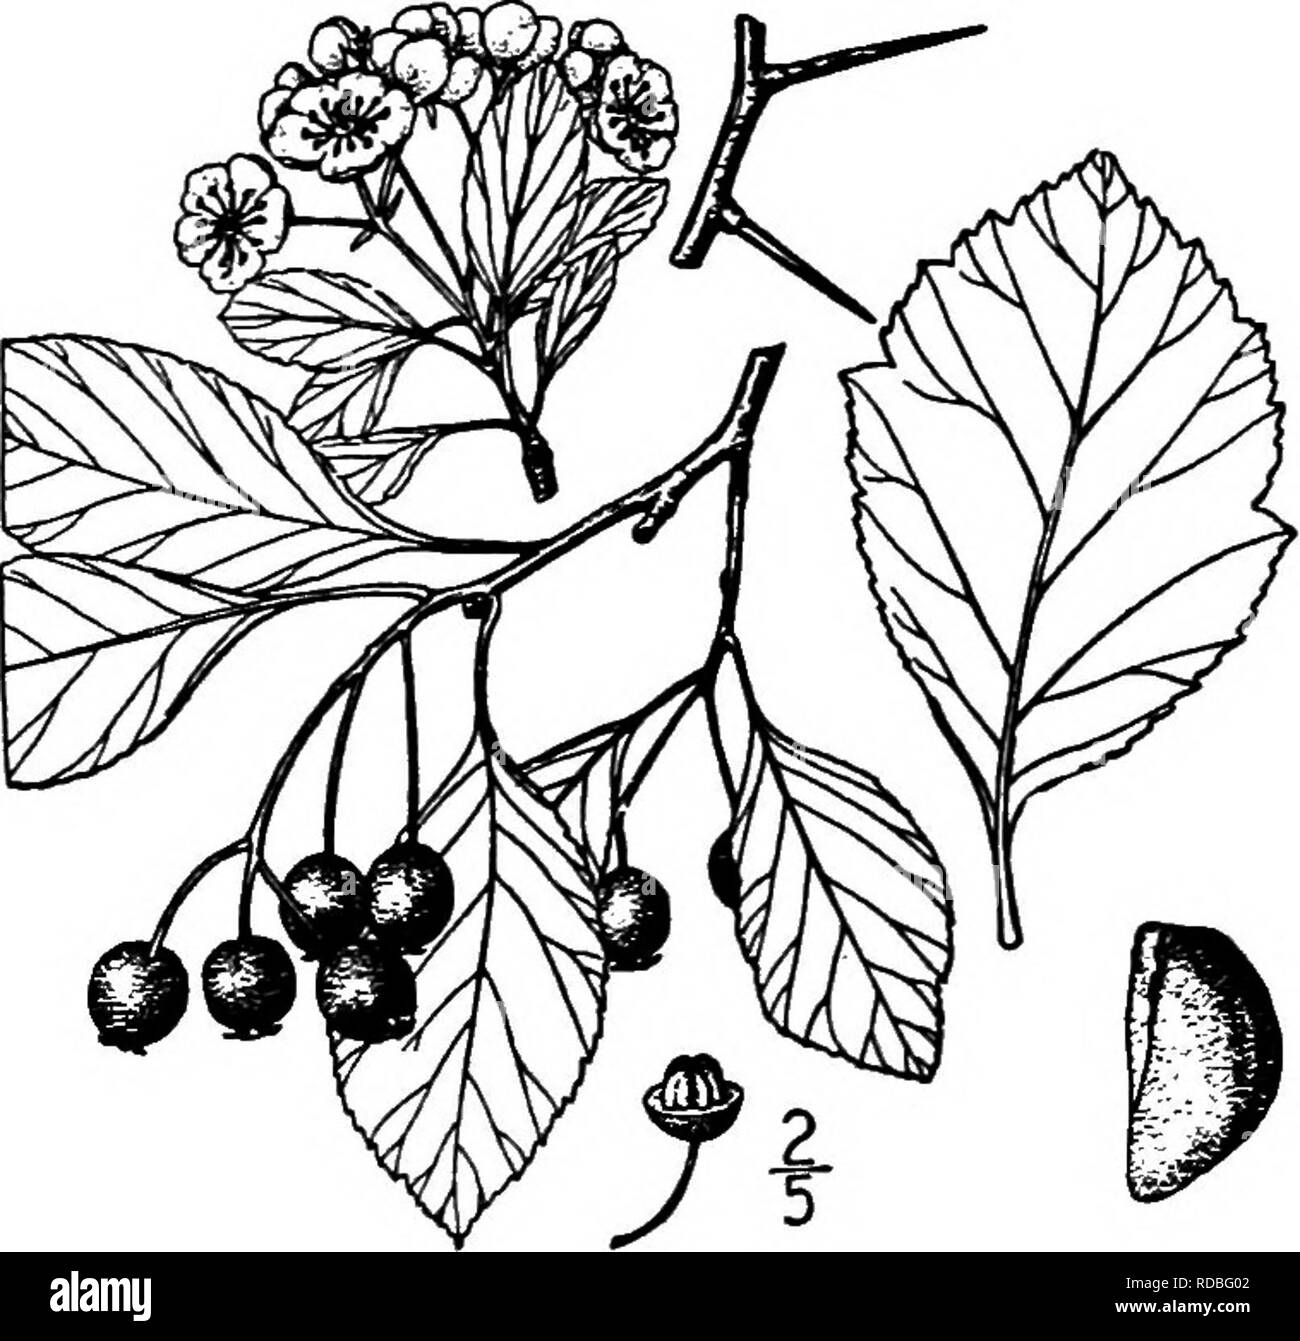 . North American trees : being descriptions and illustrations of the trees growing independently of cultivation in North America, north of Mexico and the West Indies . Trees. 4. CANBY'S THORN — Cratagns Canbyi Sargent Canby's thorn occurs from east- em Peimsylvania to the shores of Chesapeake Bay, Maryland. It is a bushy tree, sometimes 6 meters high, with long, ascending branches, form- ing a broad, irregular head; the young twigs are brown, becoming light gray, and are armed with chest- nut-brown spines from 2 to 4 cm. long. The leaves are oblong-obovate, from 2.5 to 8 cm. long and from 2 to Stock Photo